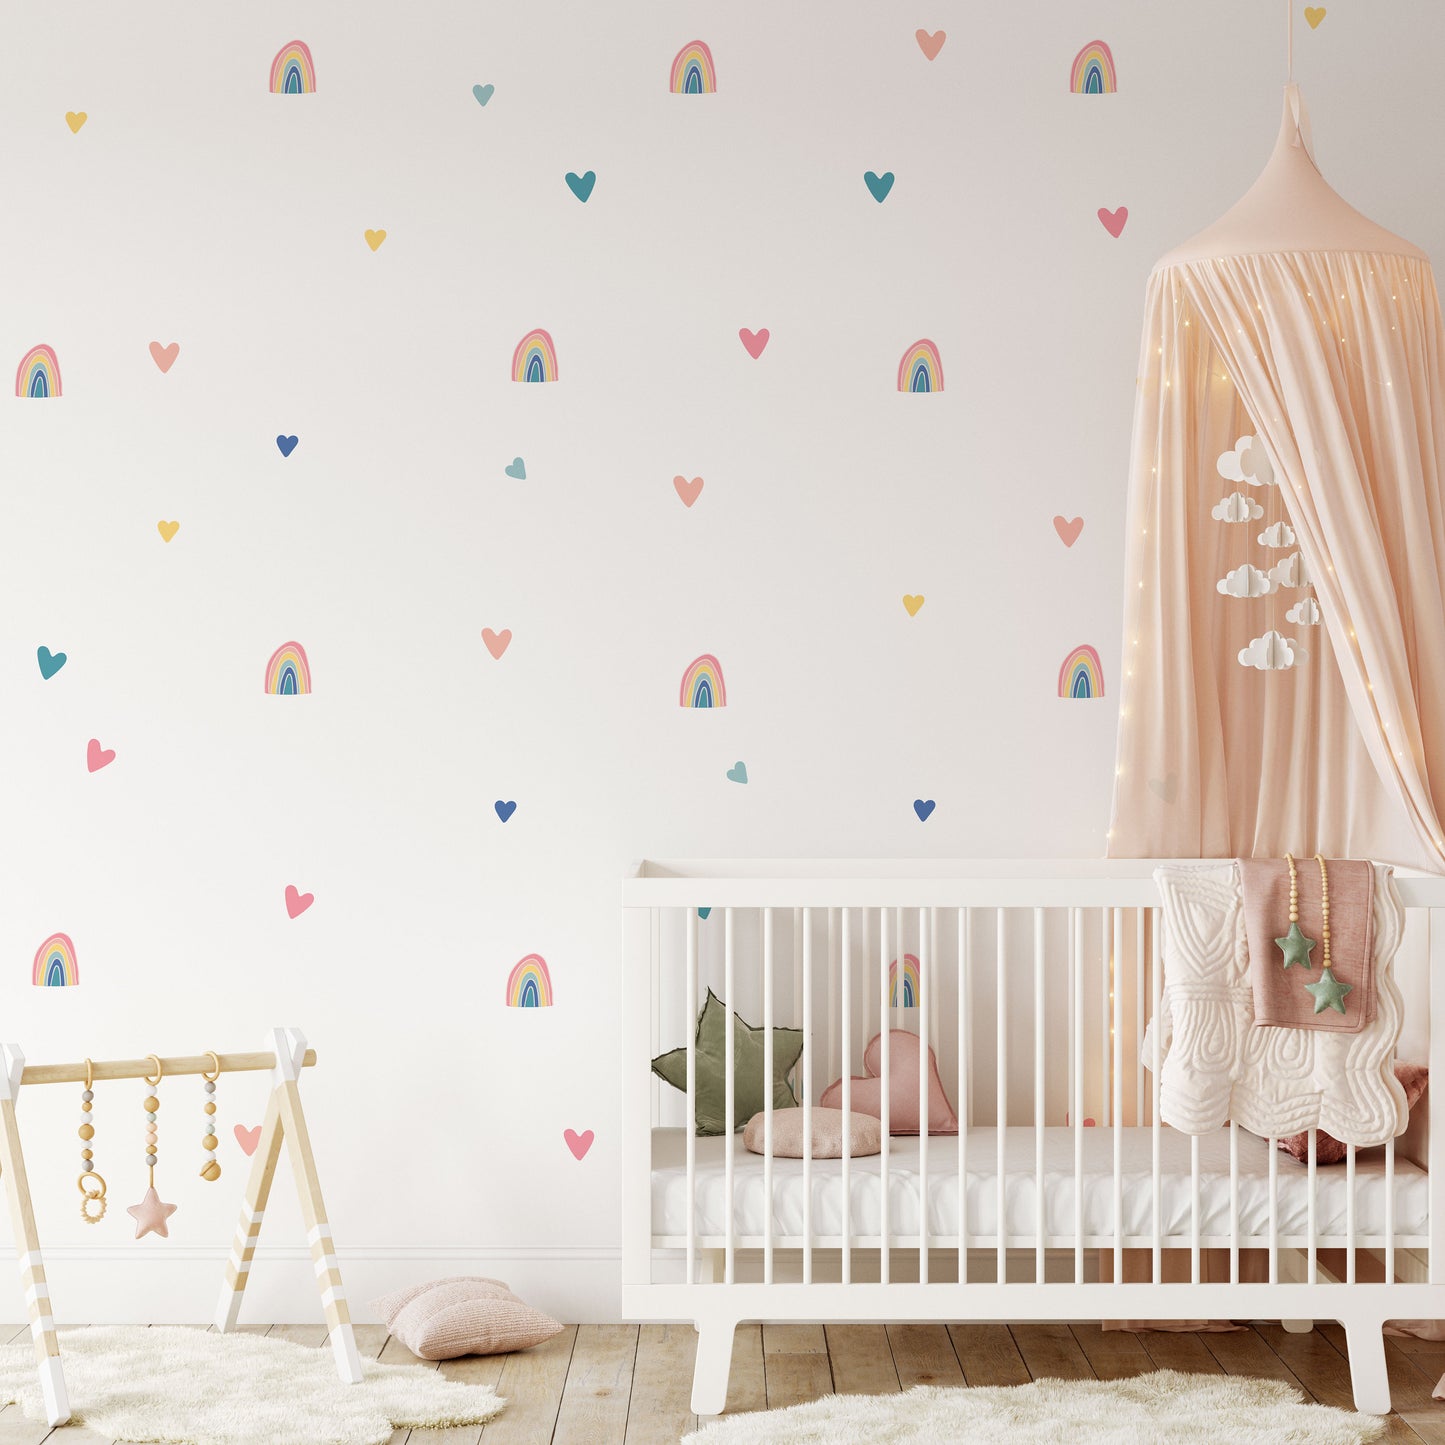 Pastel Rainbows And Hearts Wall Stickers, Boho Wall Stickers, Nursery Wall Art Decals, Wall Stickers For Girls, Cute Kids Room Wall Decor